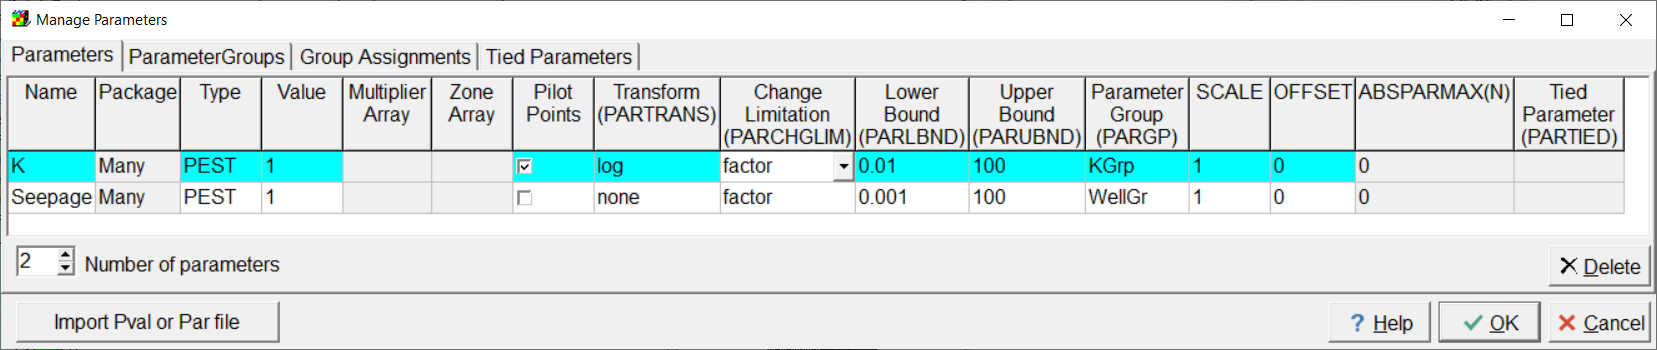 Screen capture of the Manage Parameters dialog box showing properties assigned to K and Seepage parameters.